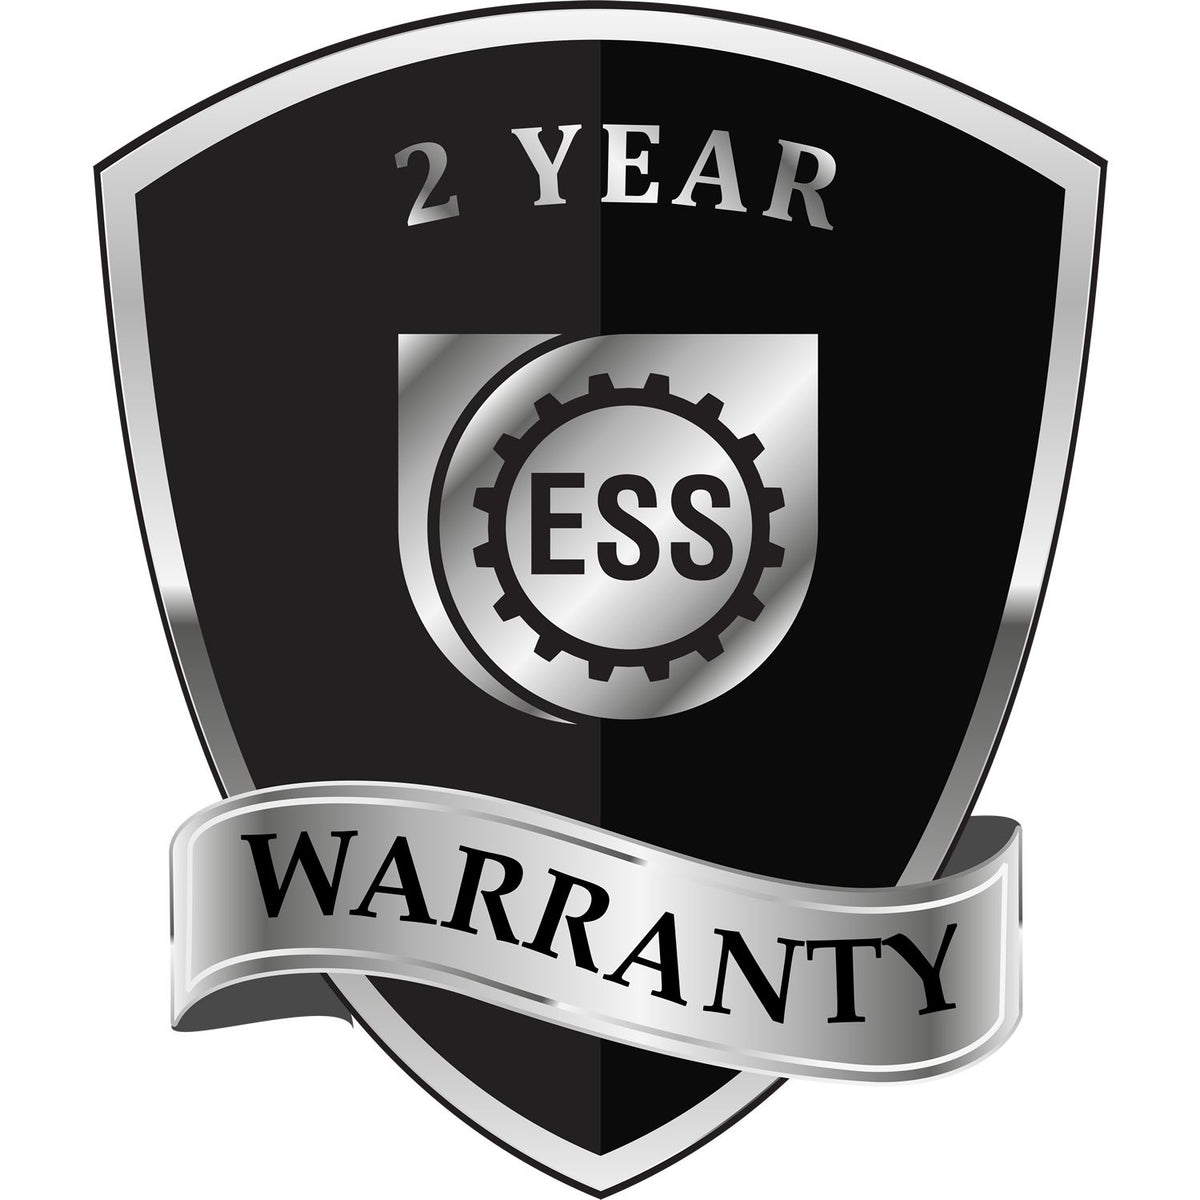 A black and silver badge or emblem showing warranty information for the Gift Utah Architect Seal